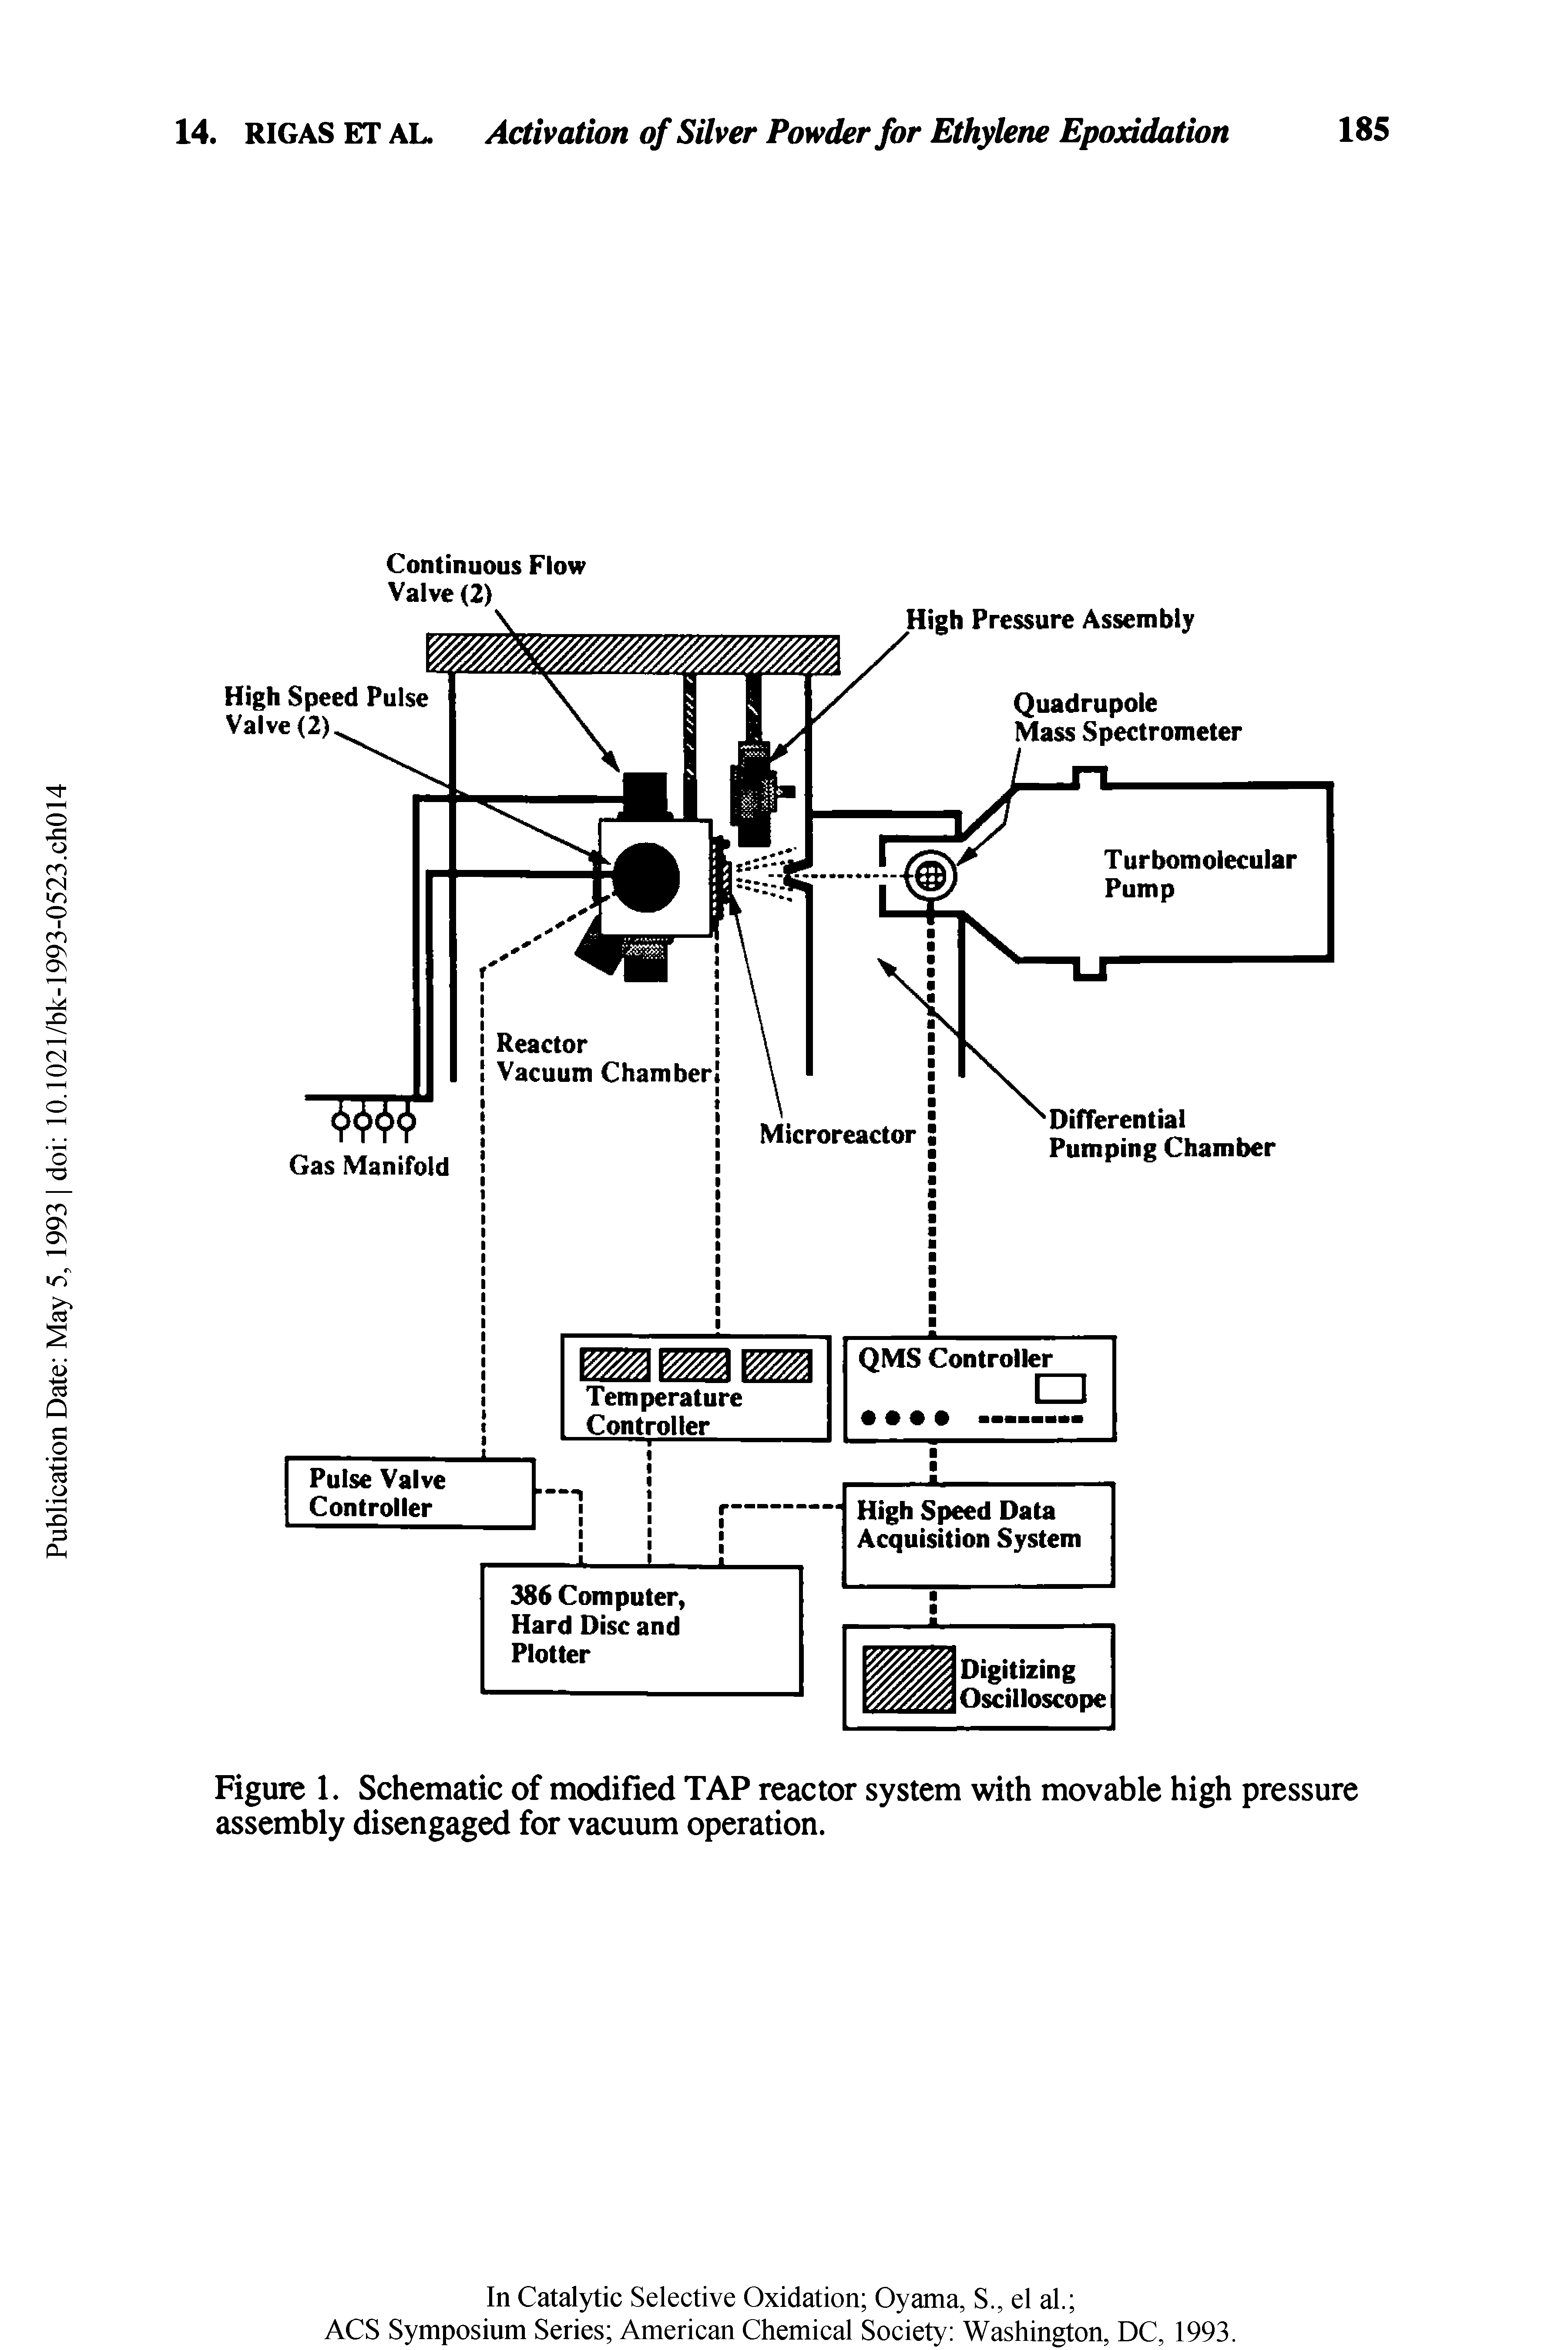 Figure 1. Schematic of modified TAP reactor system with movable high pressure assembly disengaged for vacuum operation.